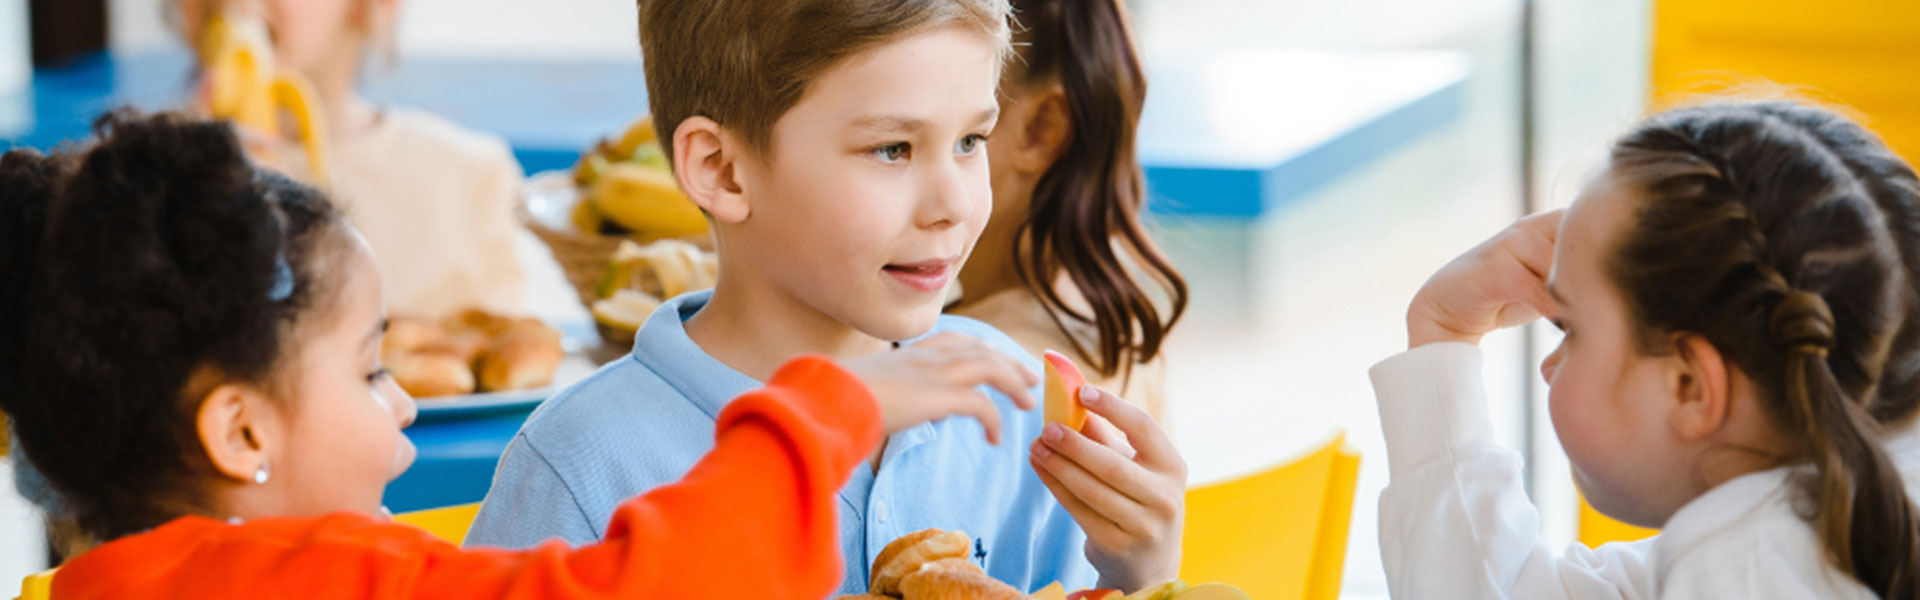 Importance of healthy eating during adolescence